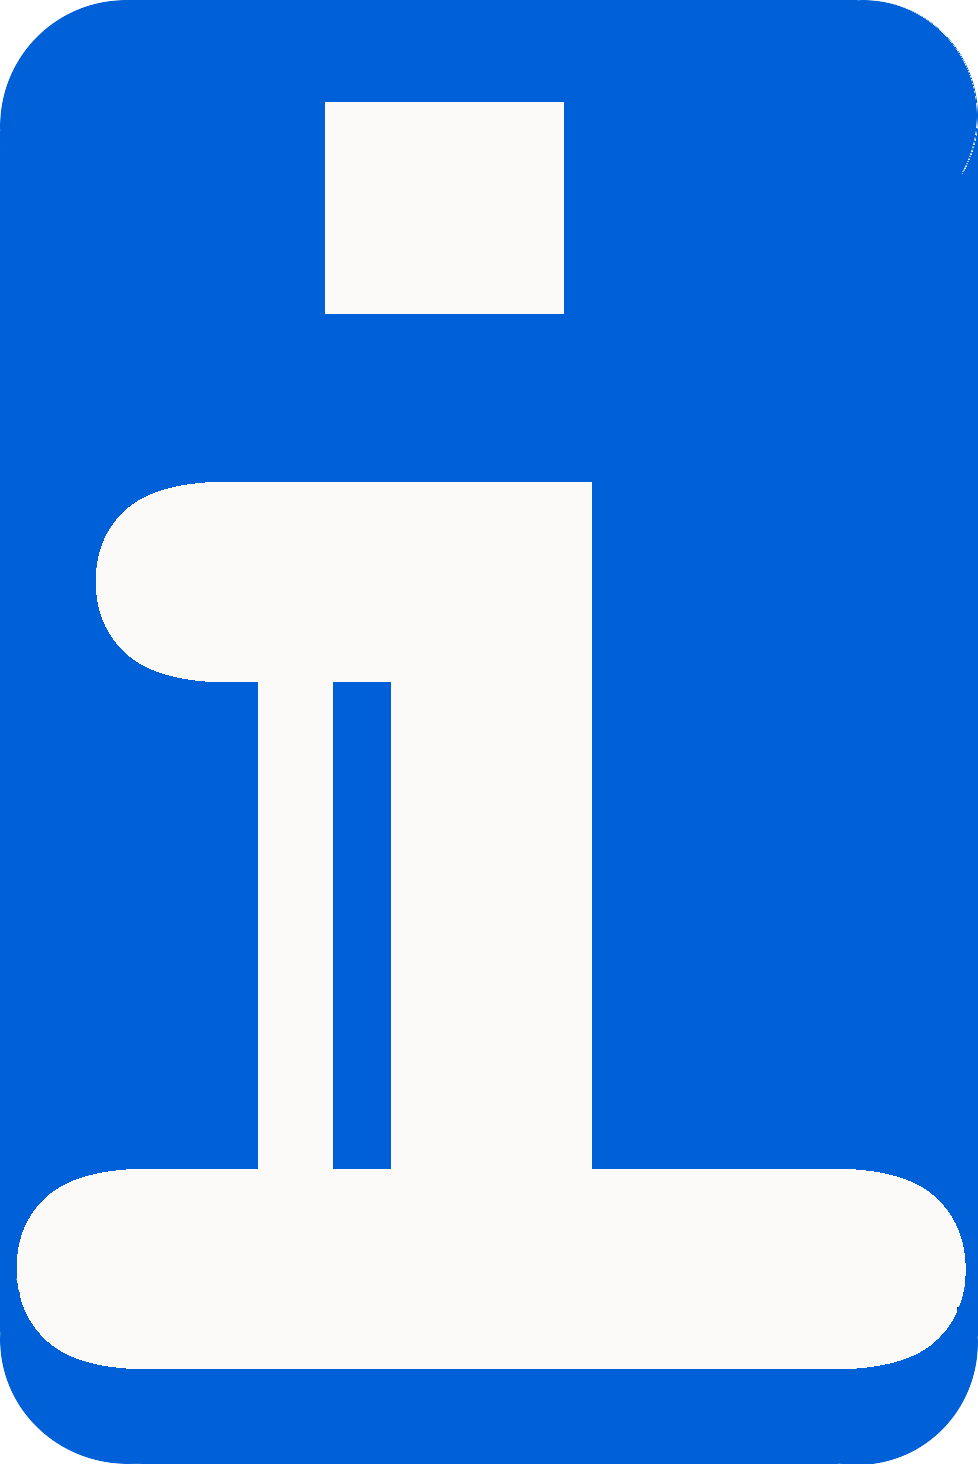 projects:infolab:logo_infolab_blau_rund.png